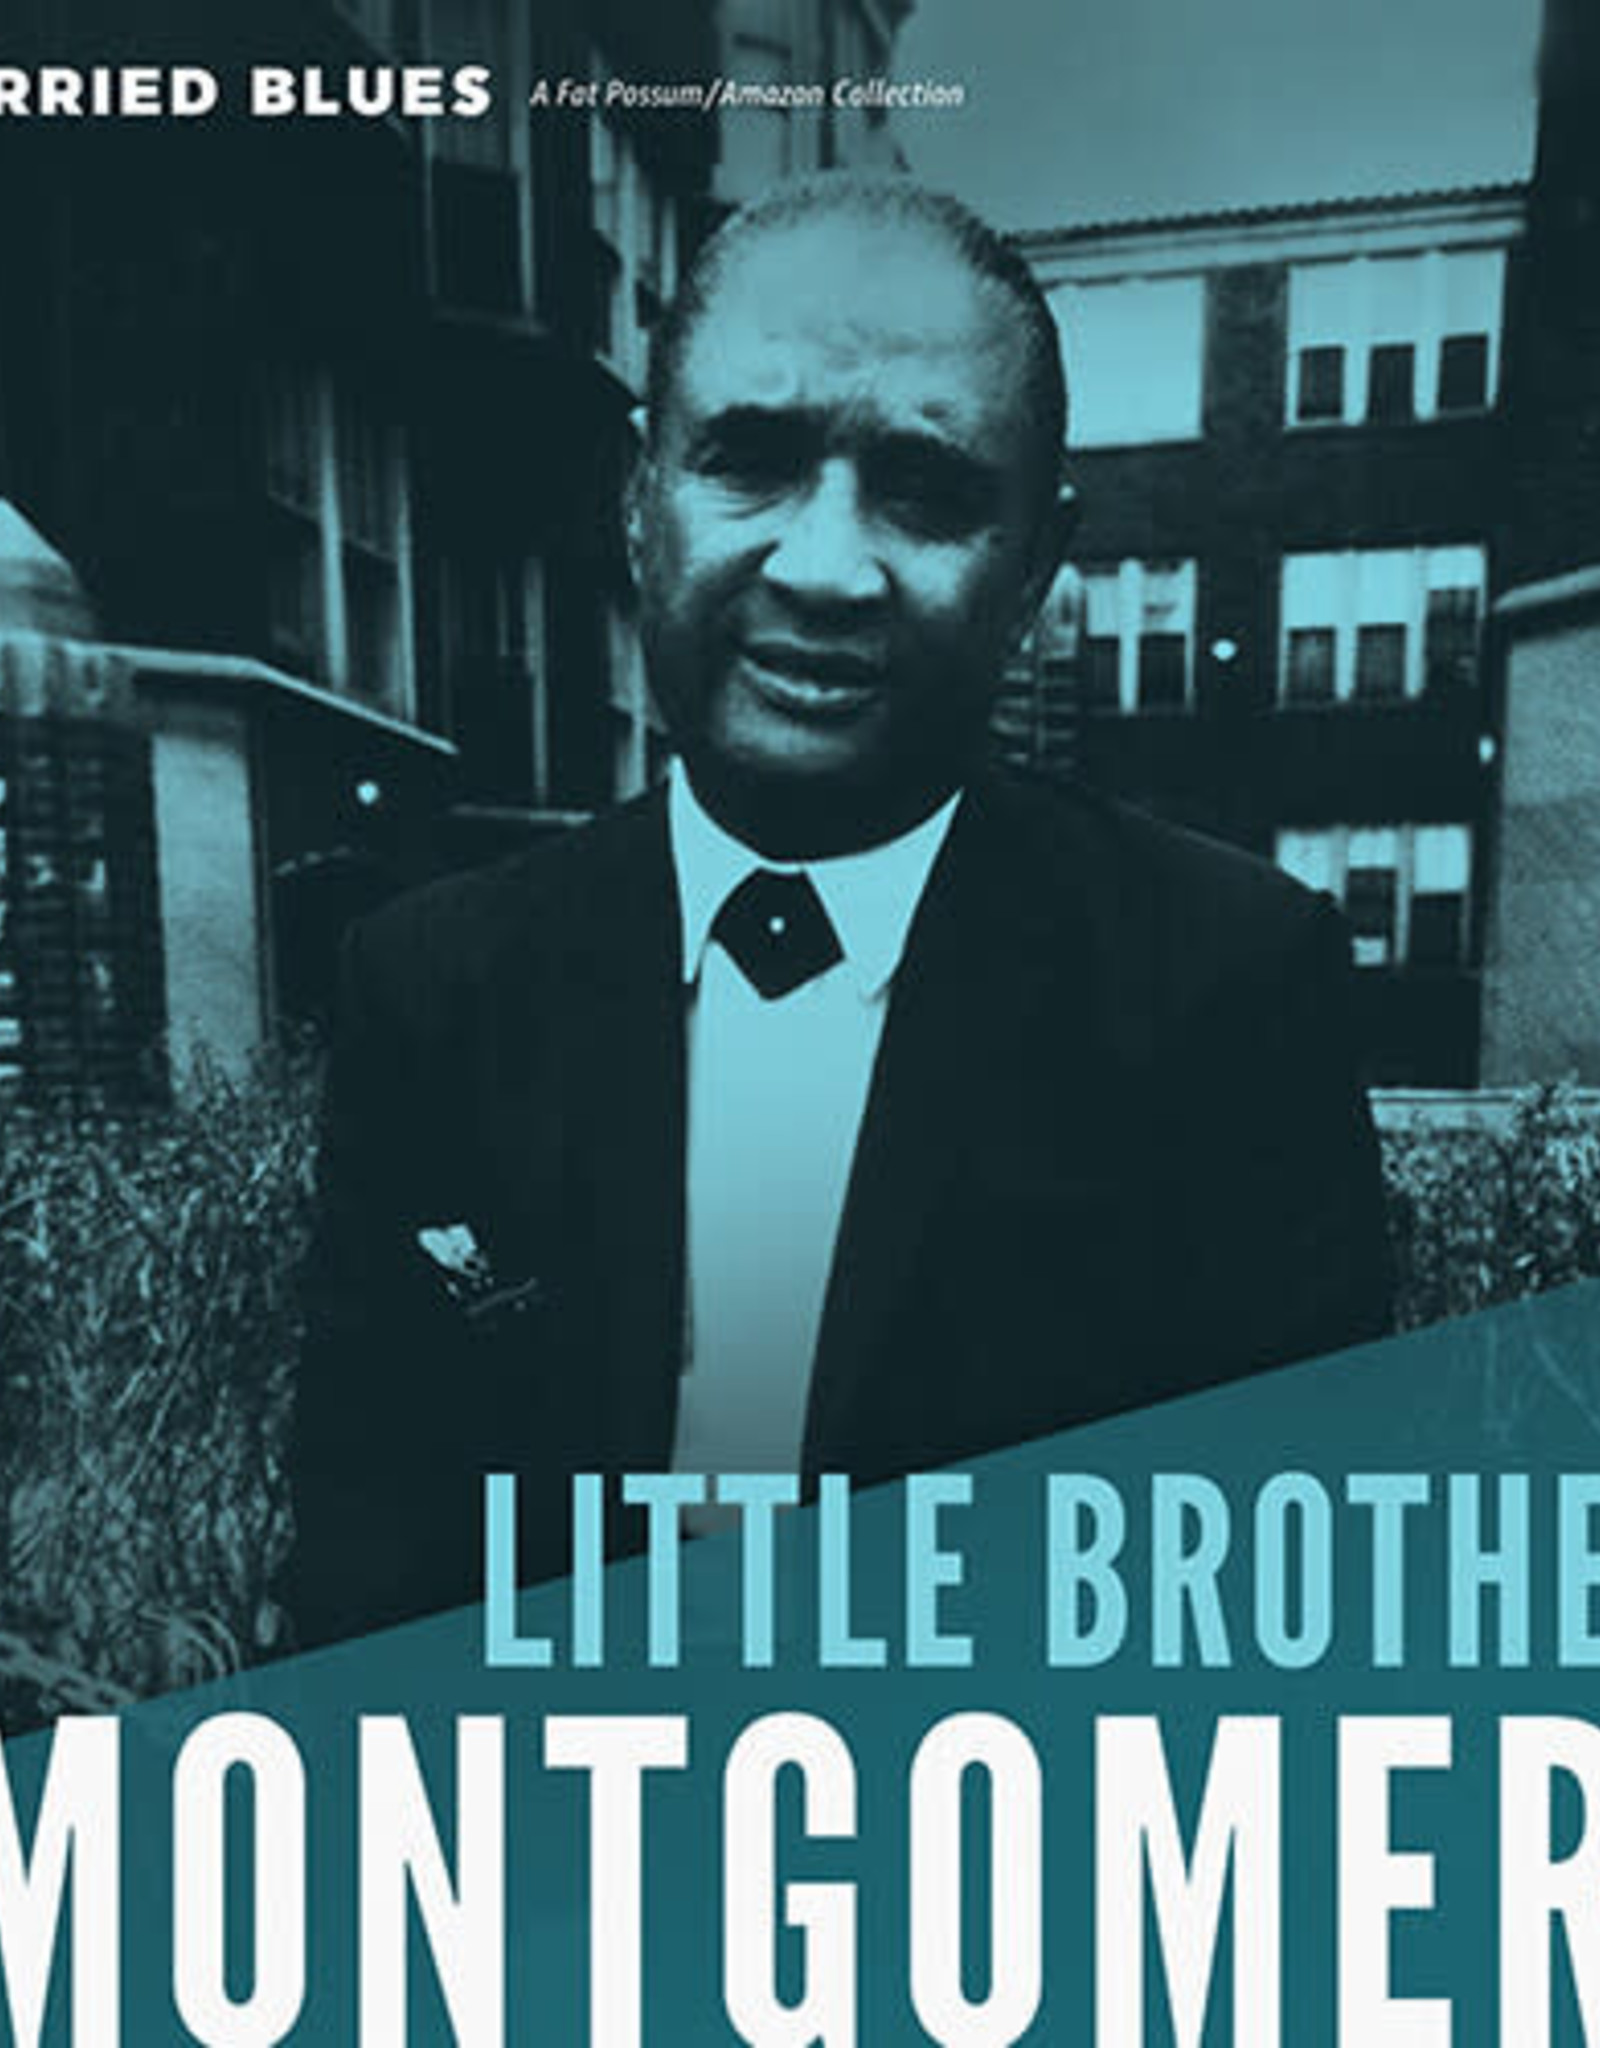 Little Brother Montgomery - Worried Blues